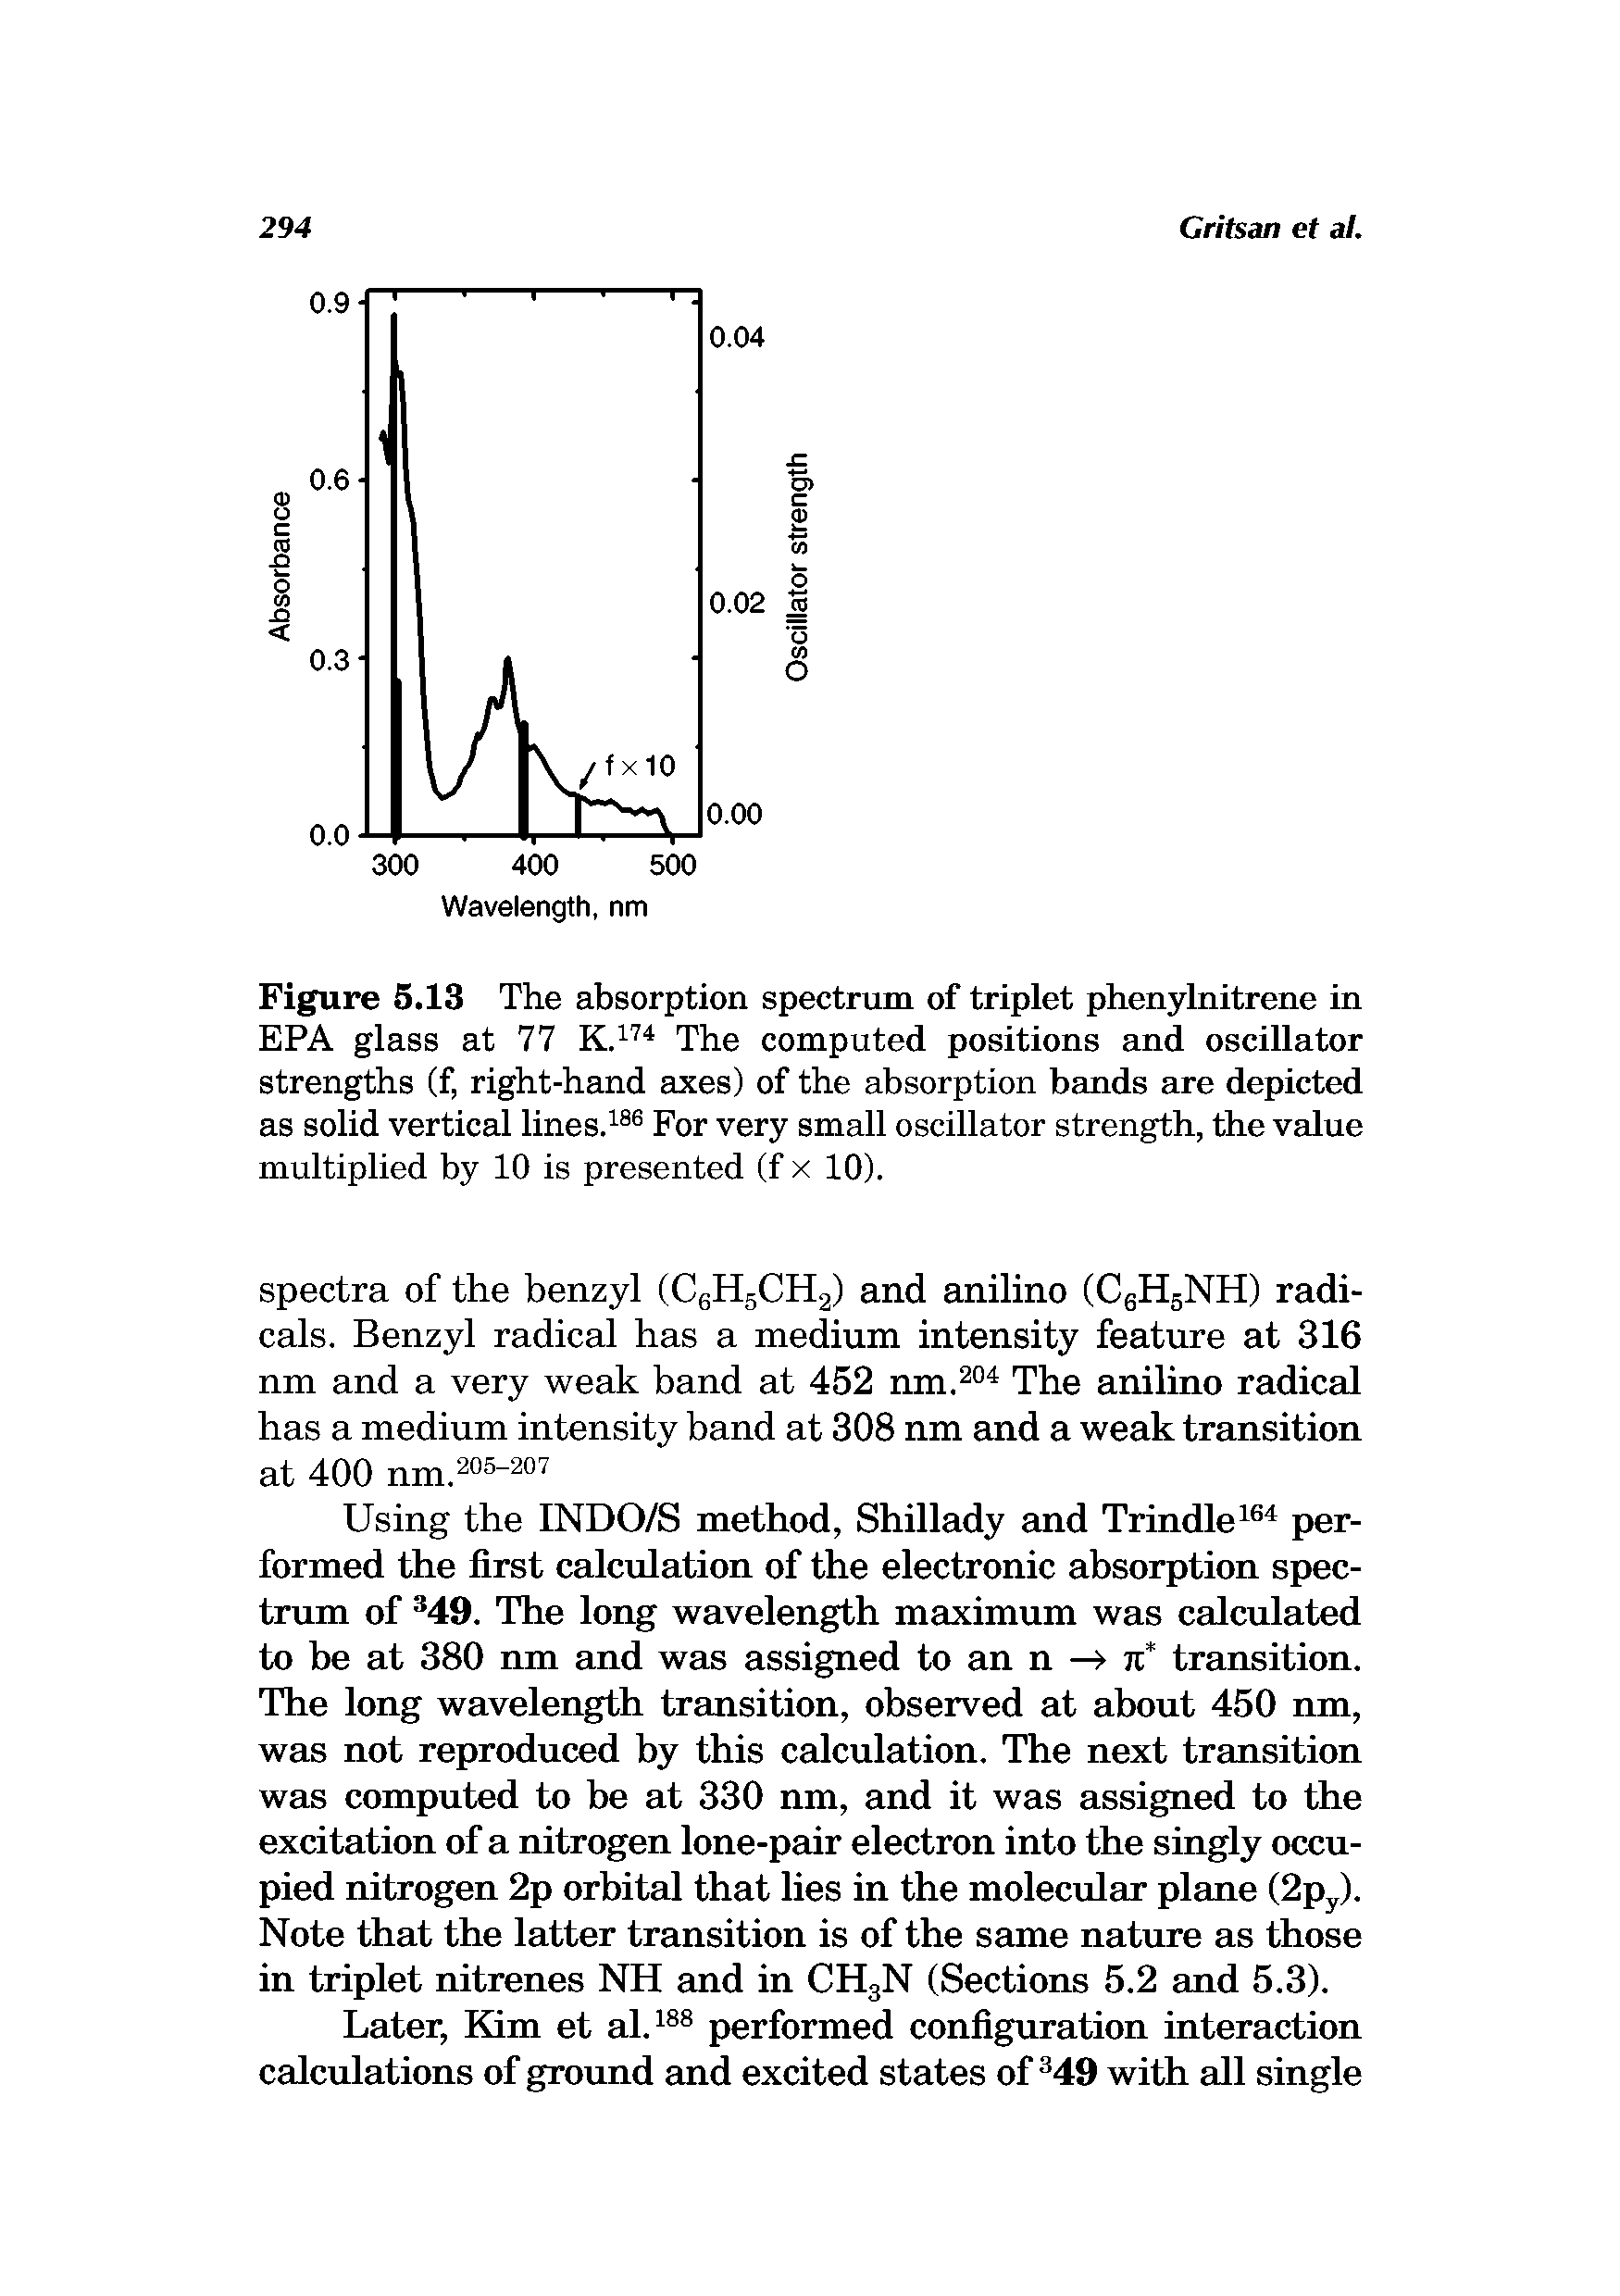 Figure 5.13 The absorption spectrum of triplet phenylnitrene in EPA glass at 77 The computed positions and oscillator...